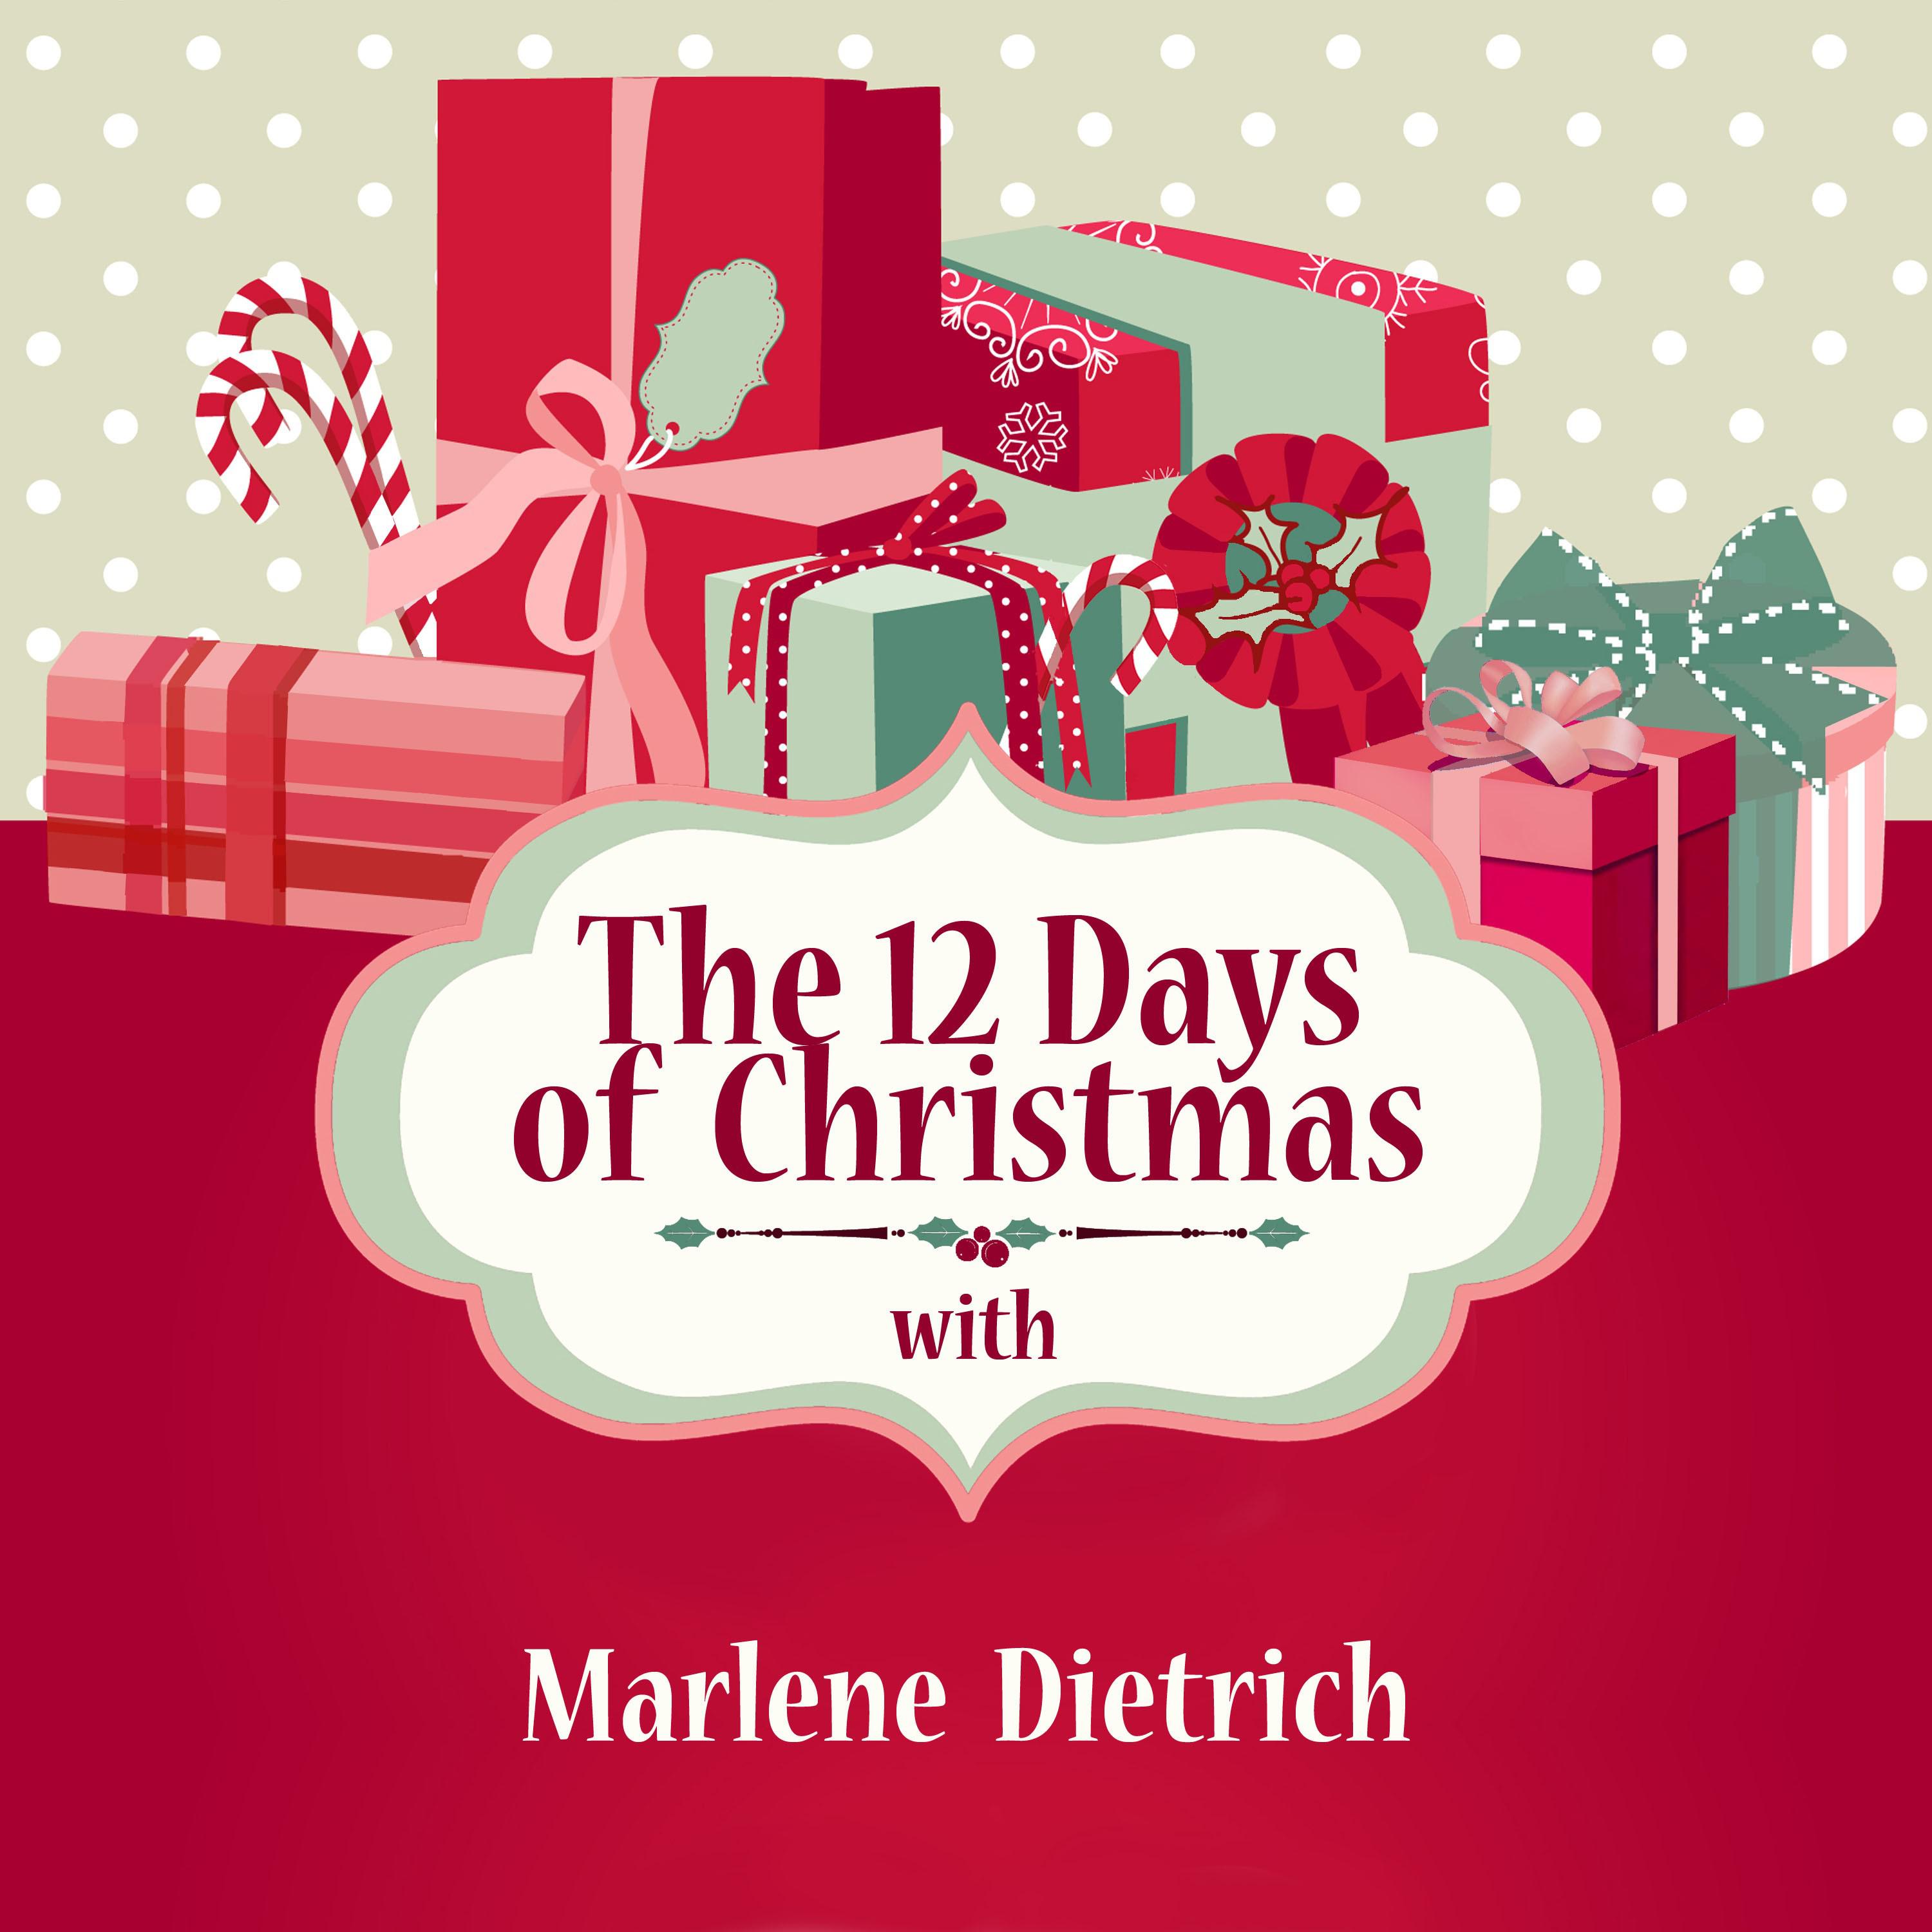 The 12 Days of Christmas with Marlene Dietrich